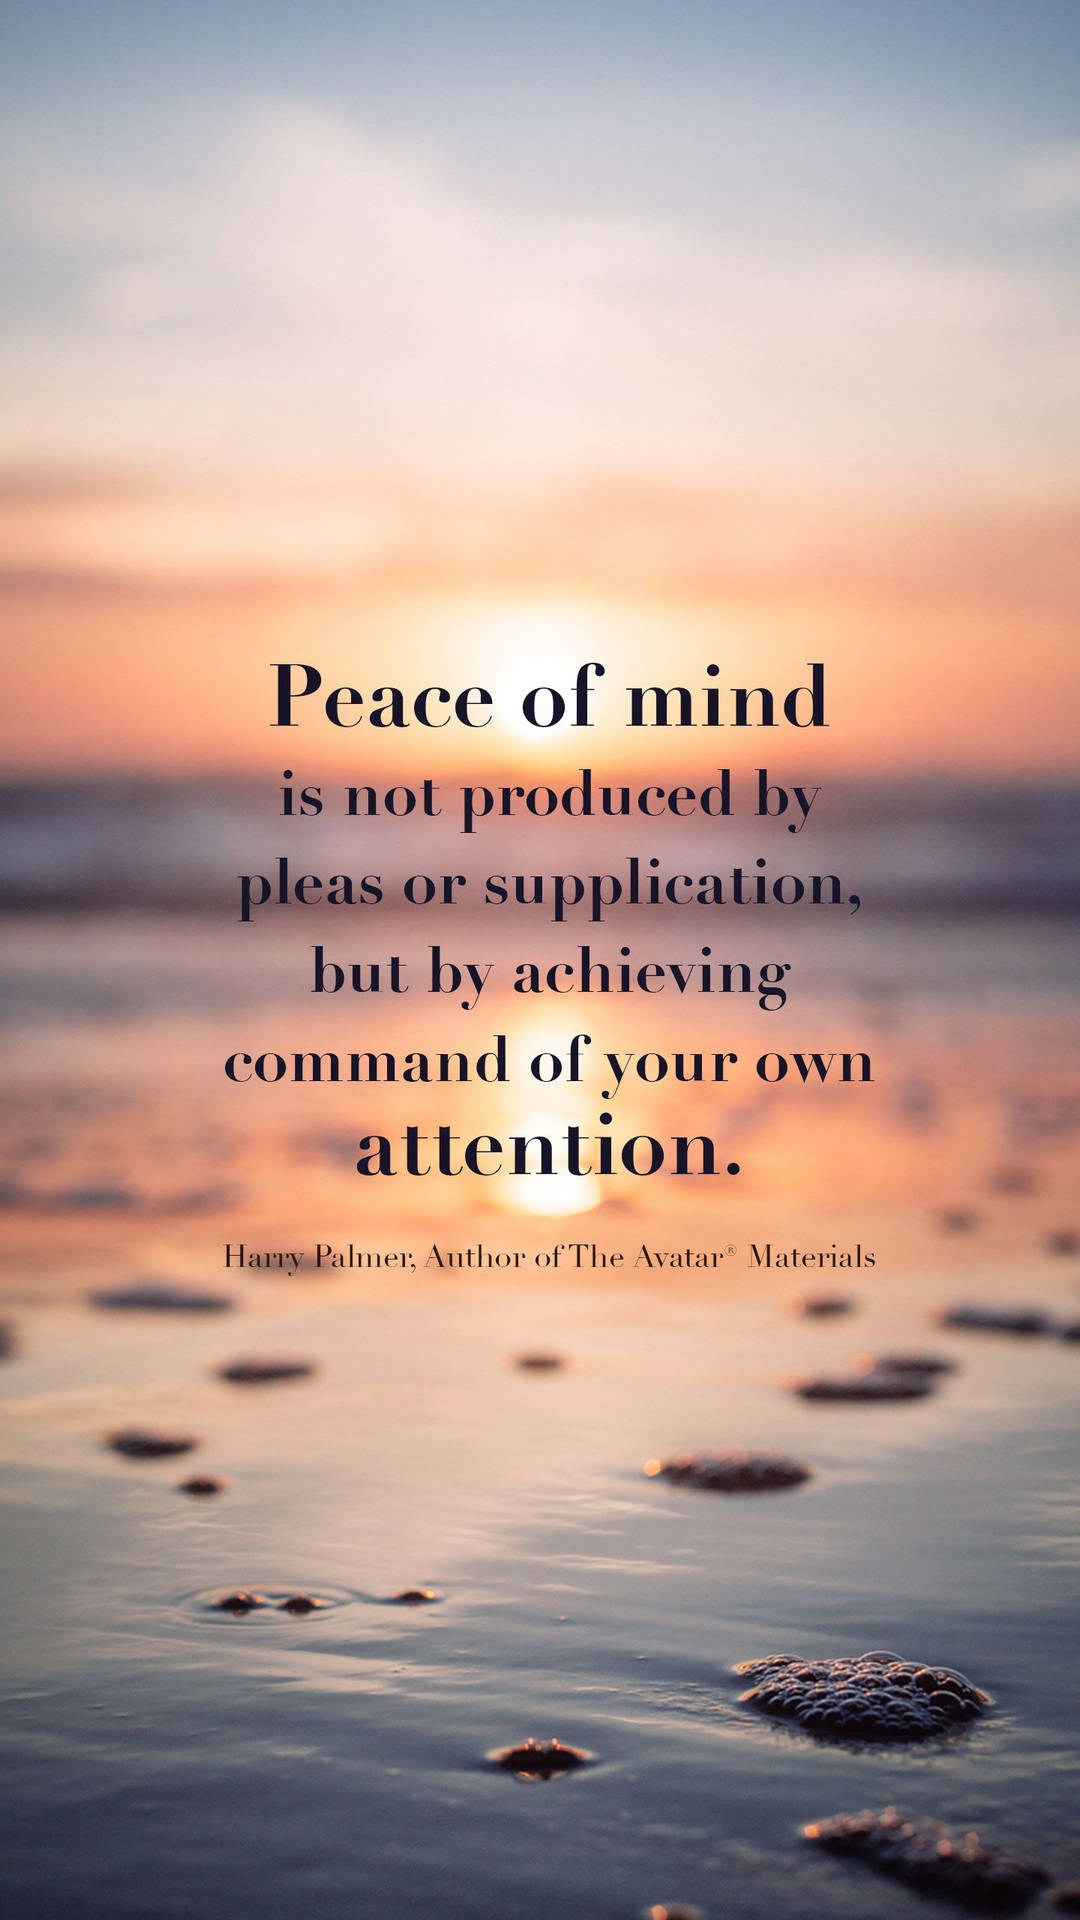 Download Peace Of Mind Quote Wallpaper 